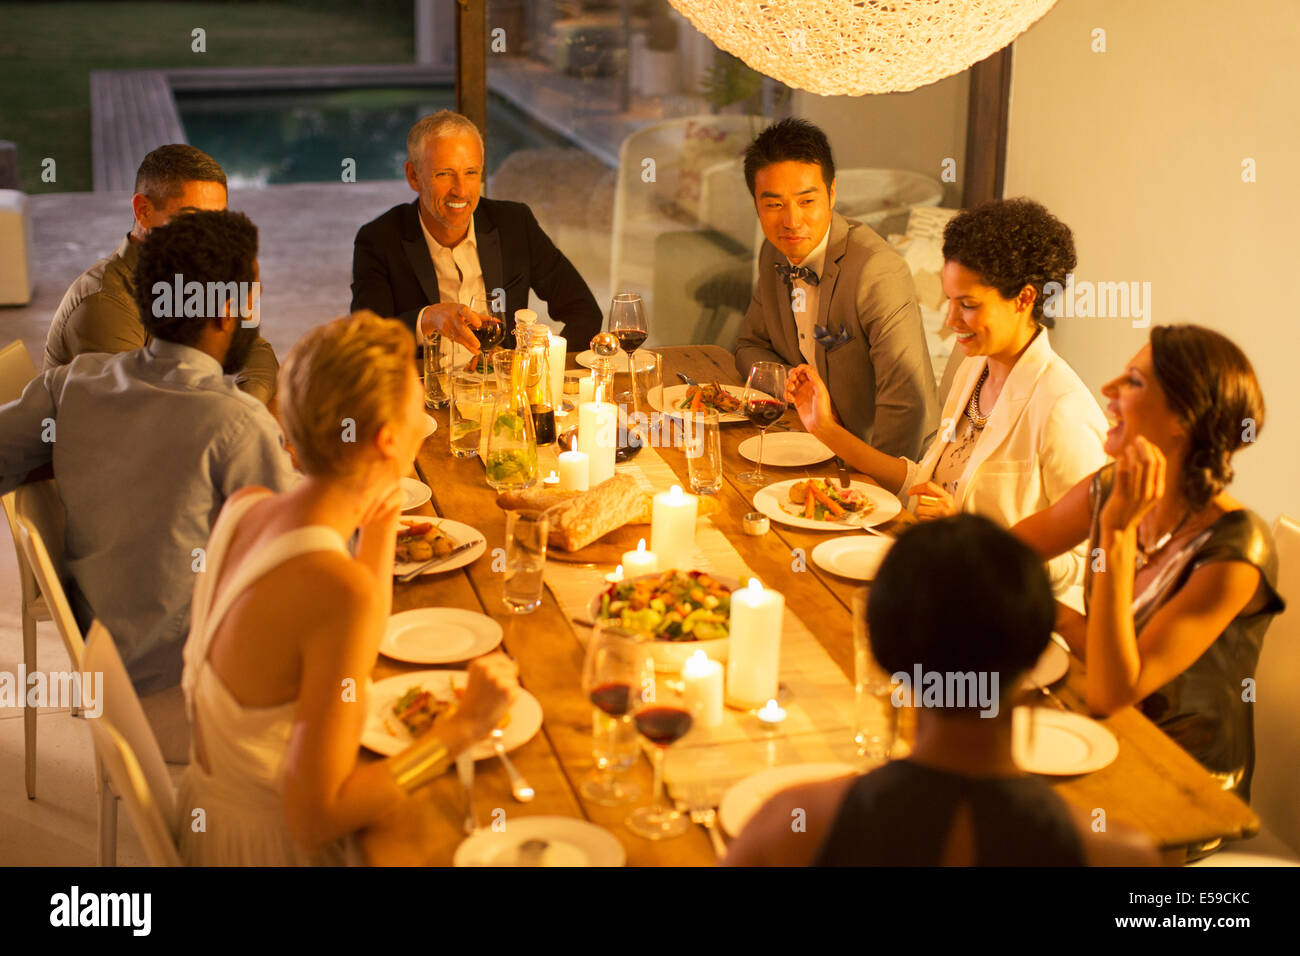 Friends eating together at dinner party Stock Photo